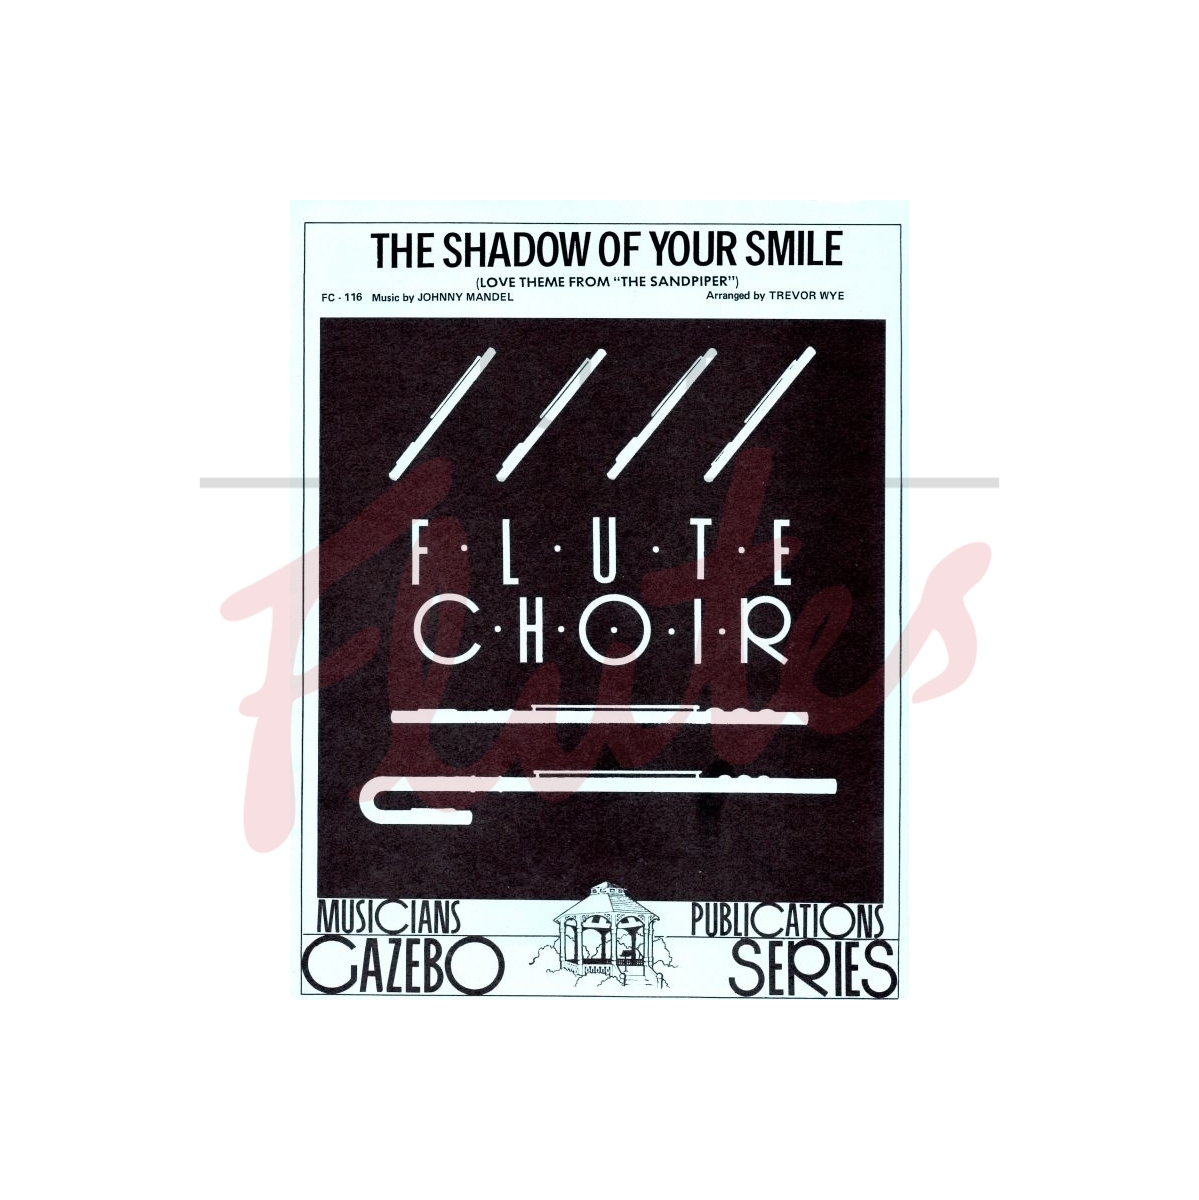 The Shadow of Your Smile [Flute Choir]